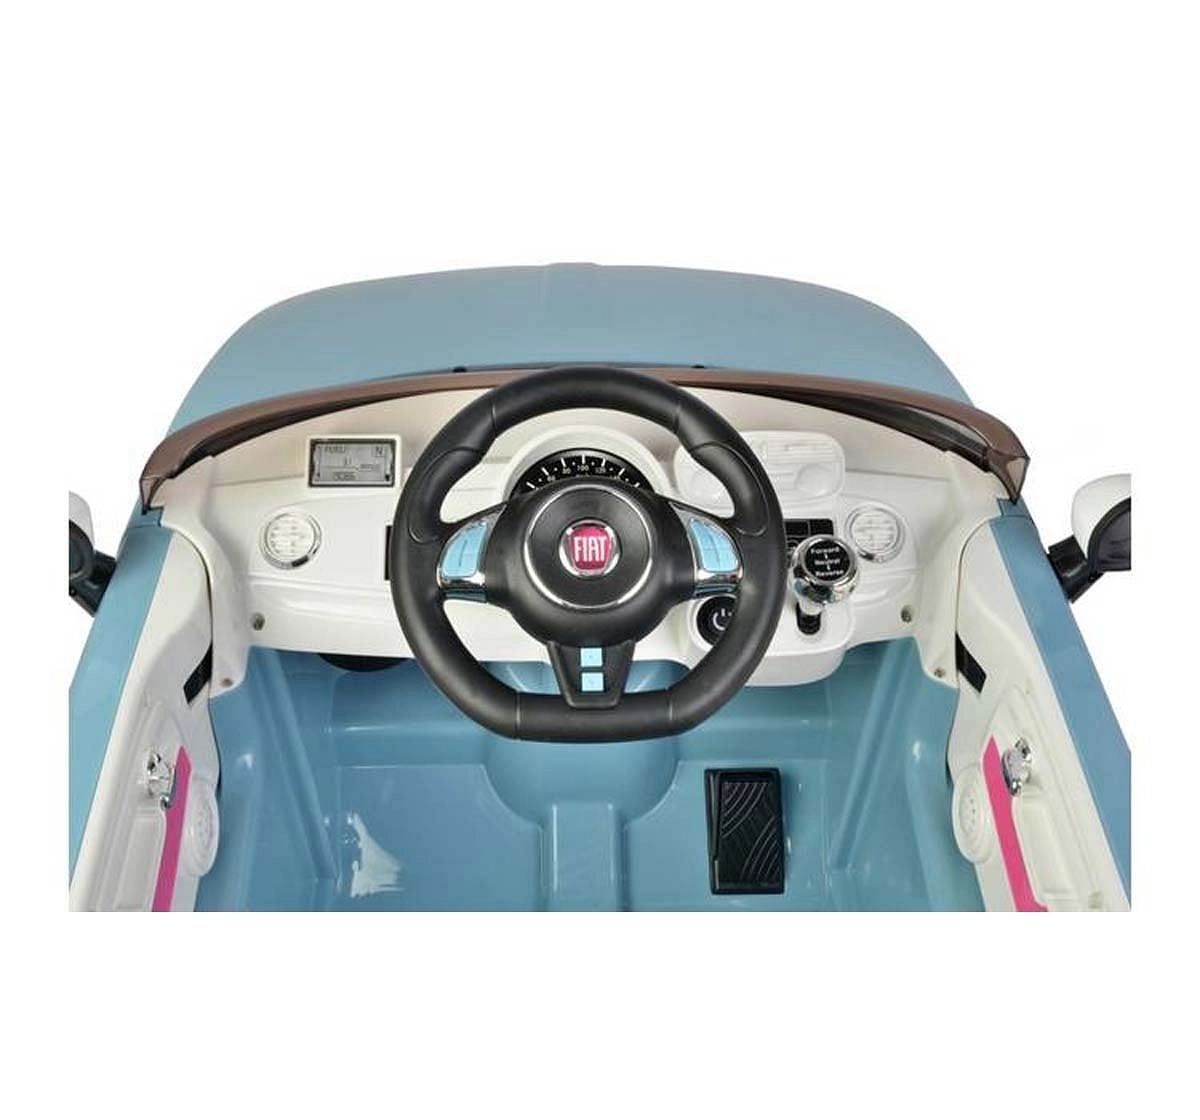 Chilokbo Fiat 500 Battery Operated Ride-on Car Blue Battery Operated Rideons for Kids age 18M +